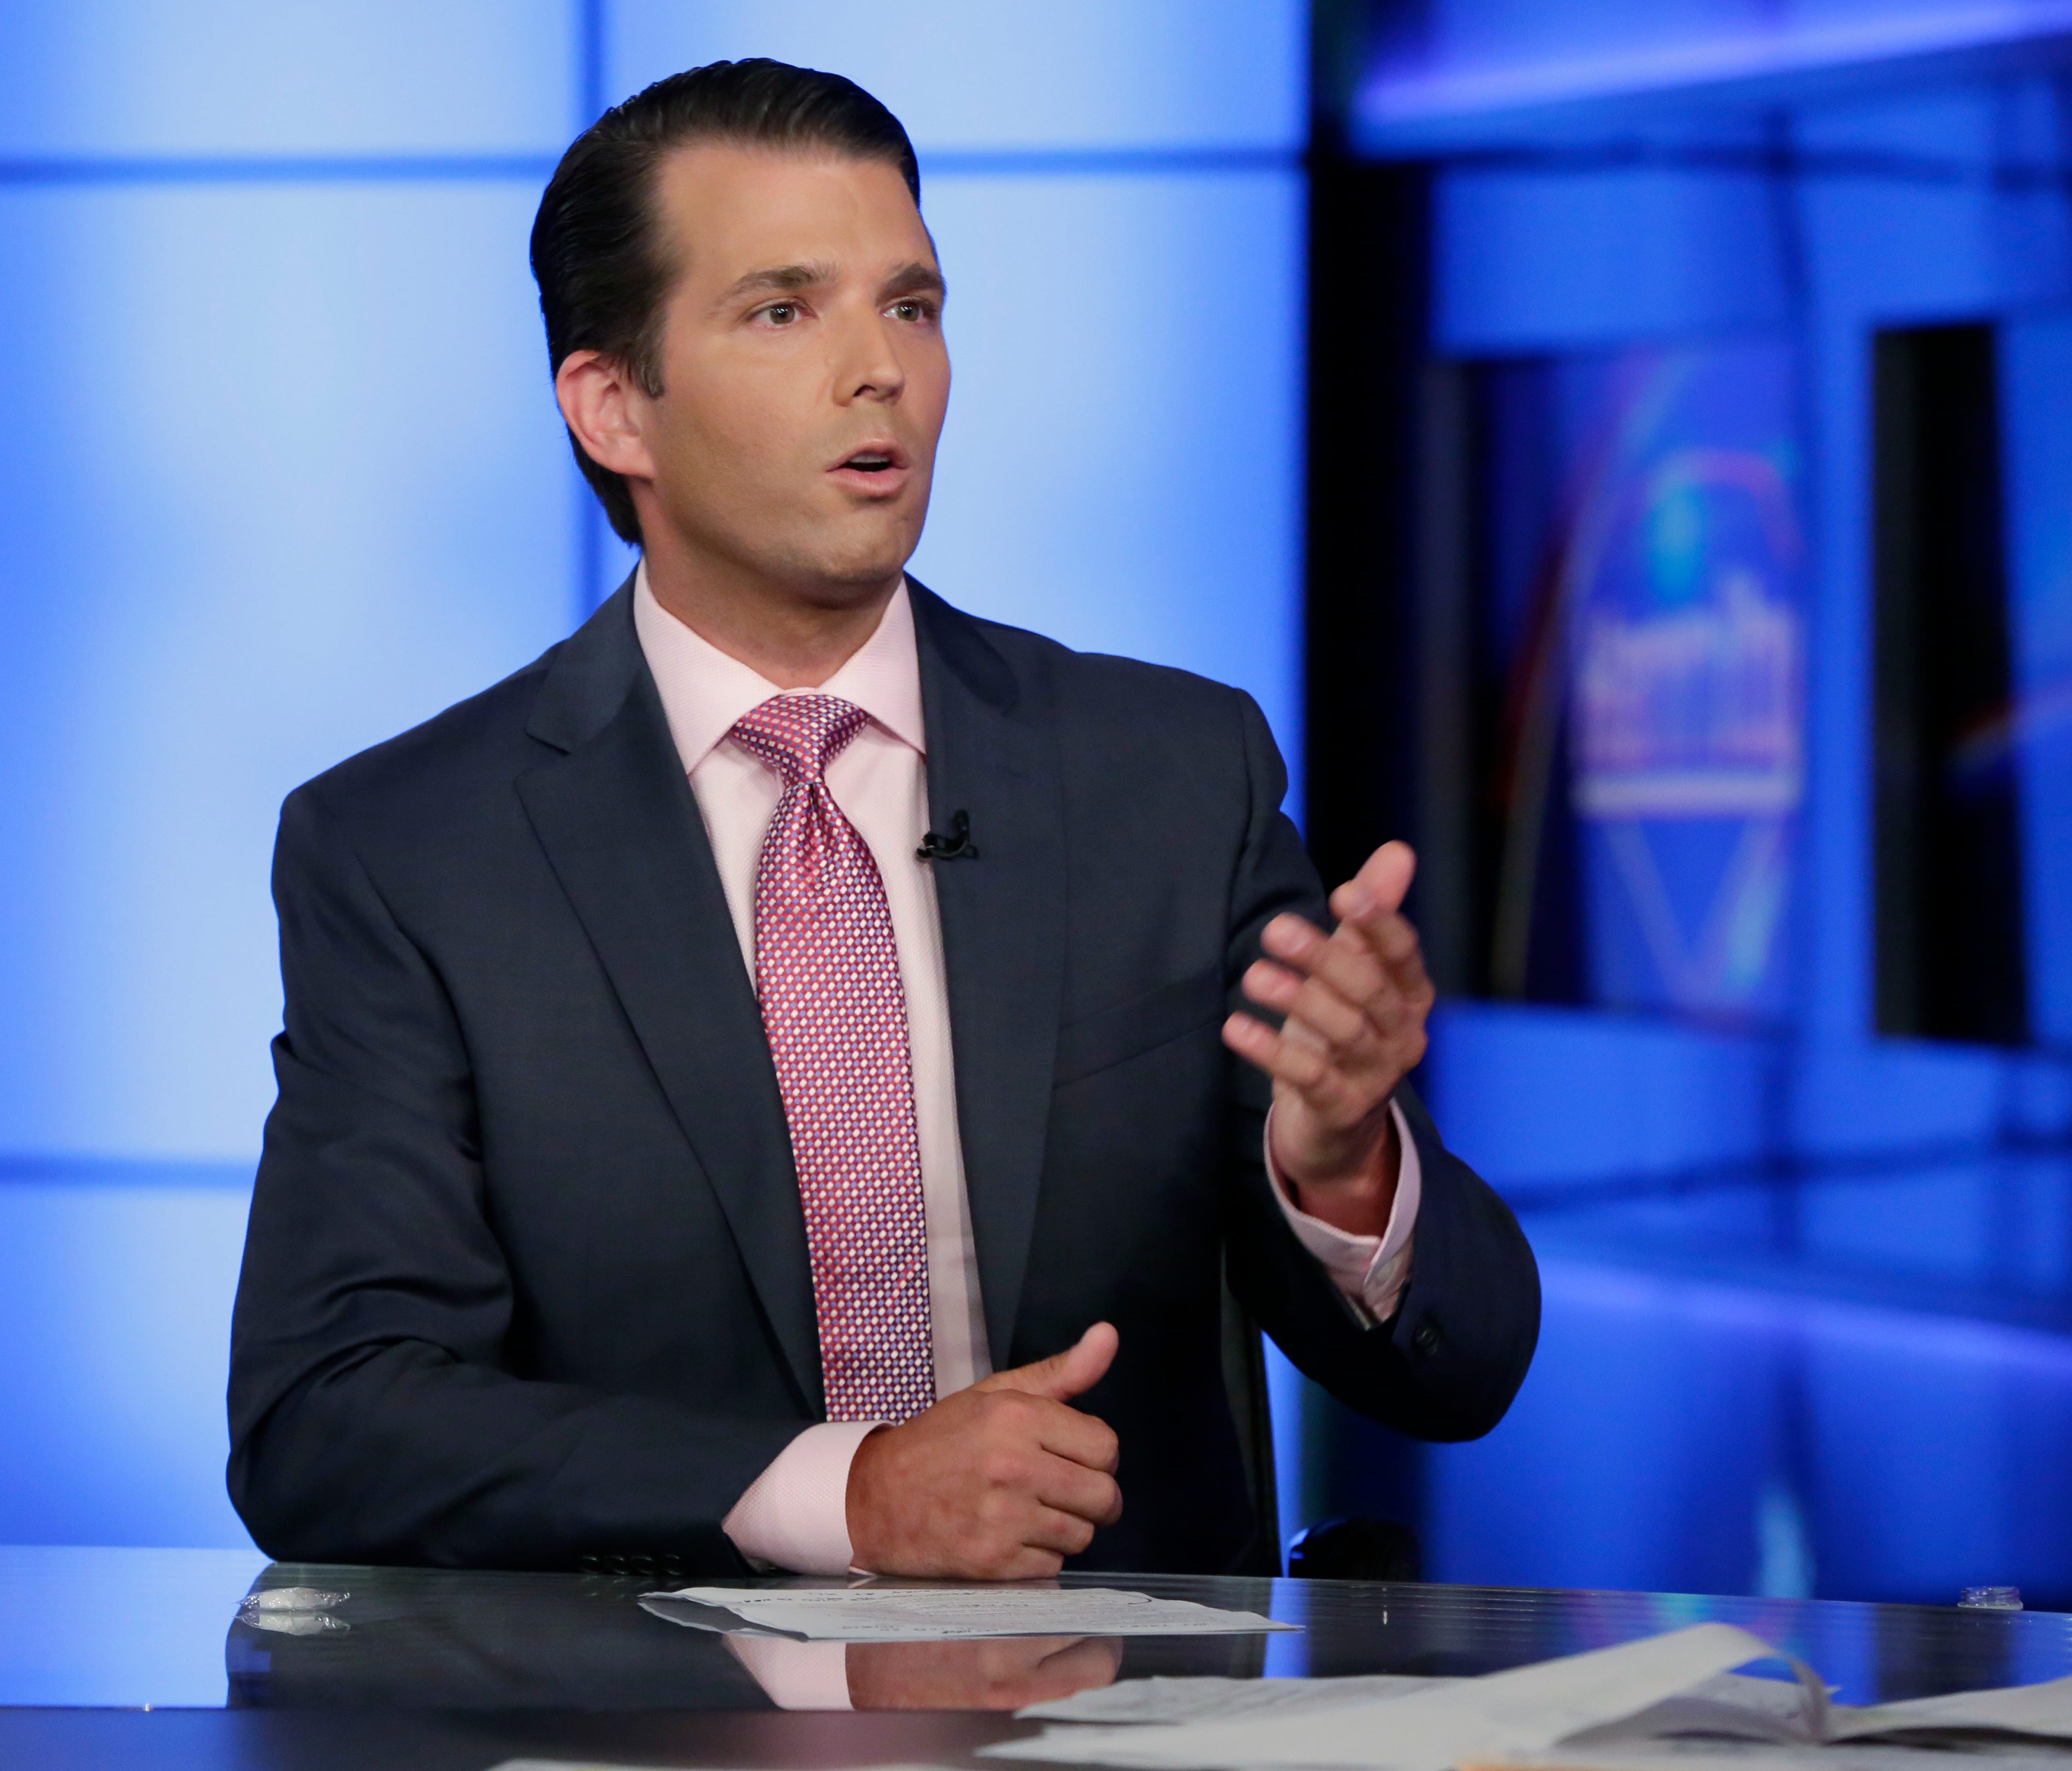 Donald Trump Jr. is interviewed by Sean Hannity on July 11, 2017.